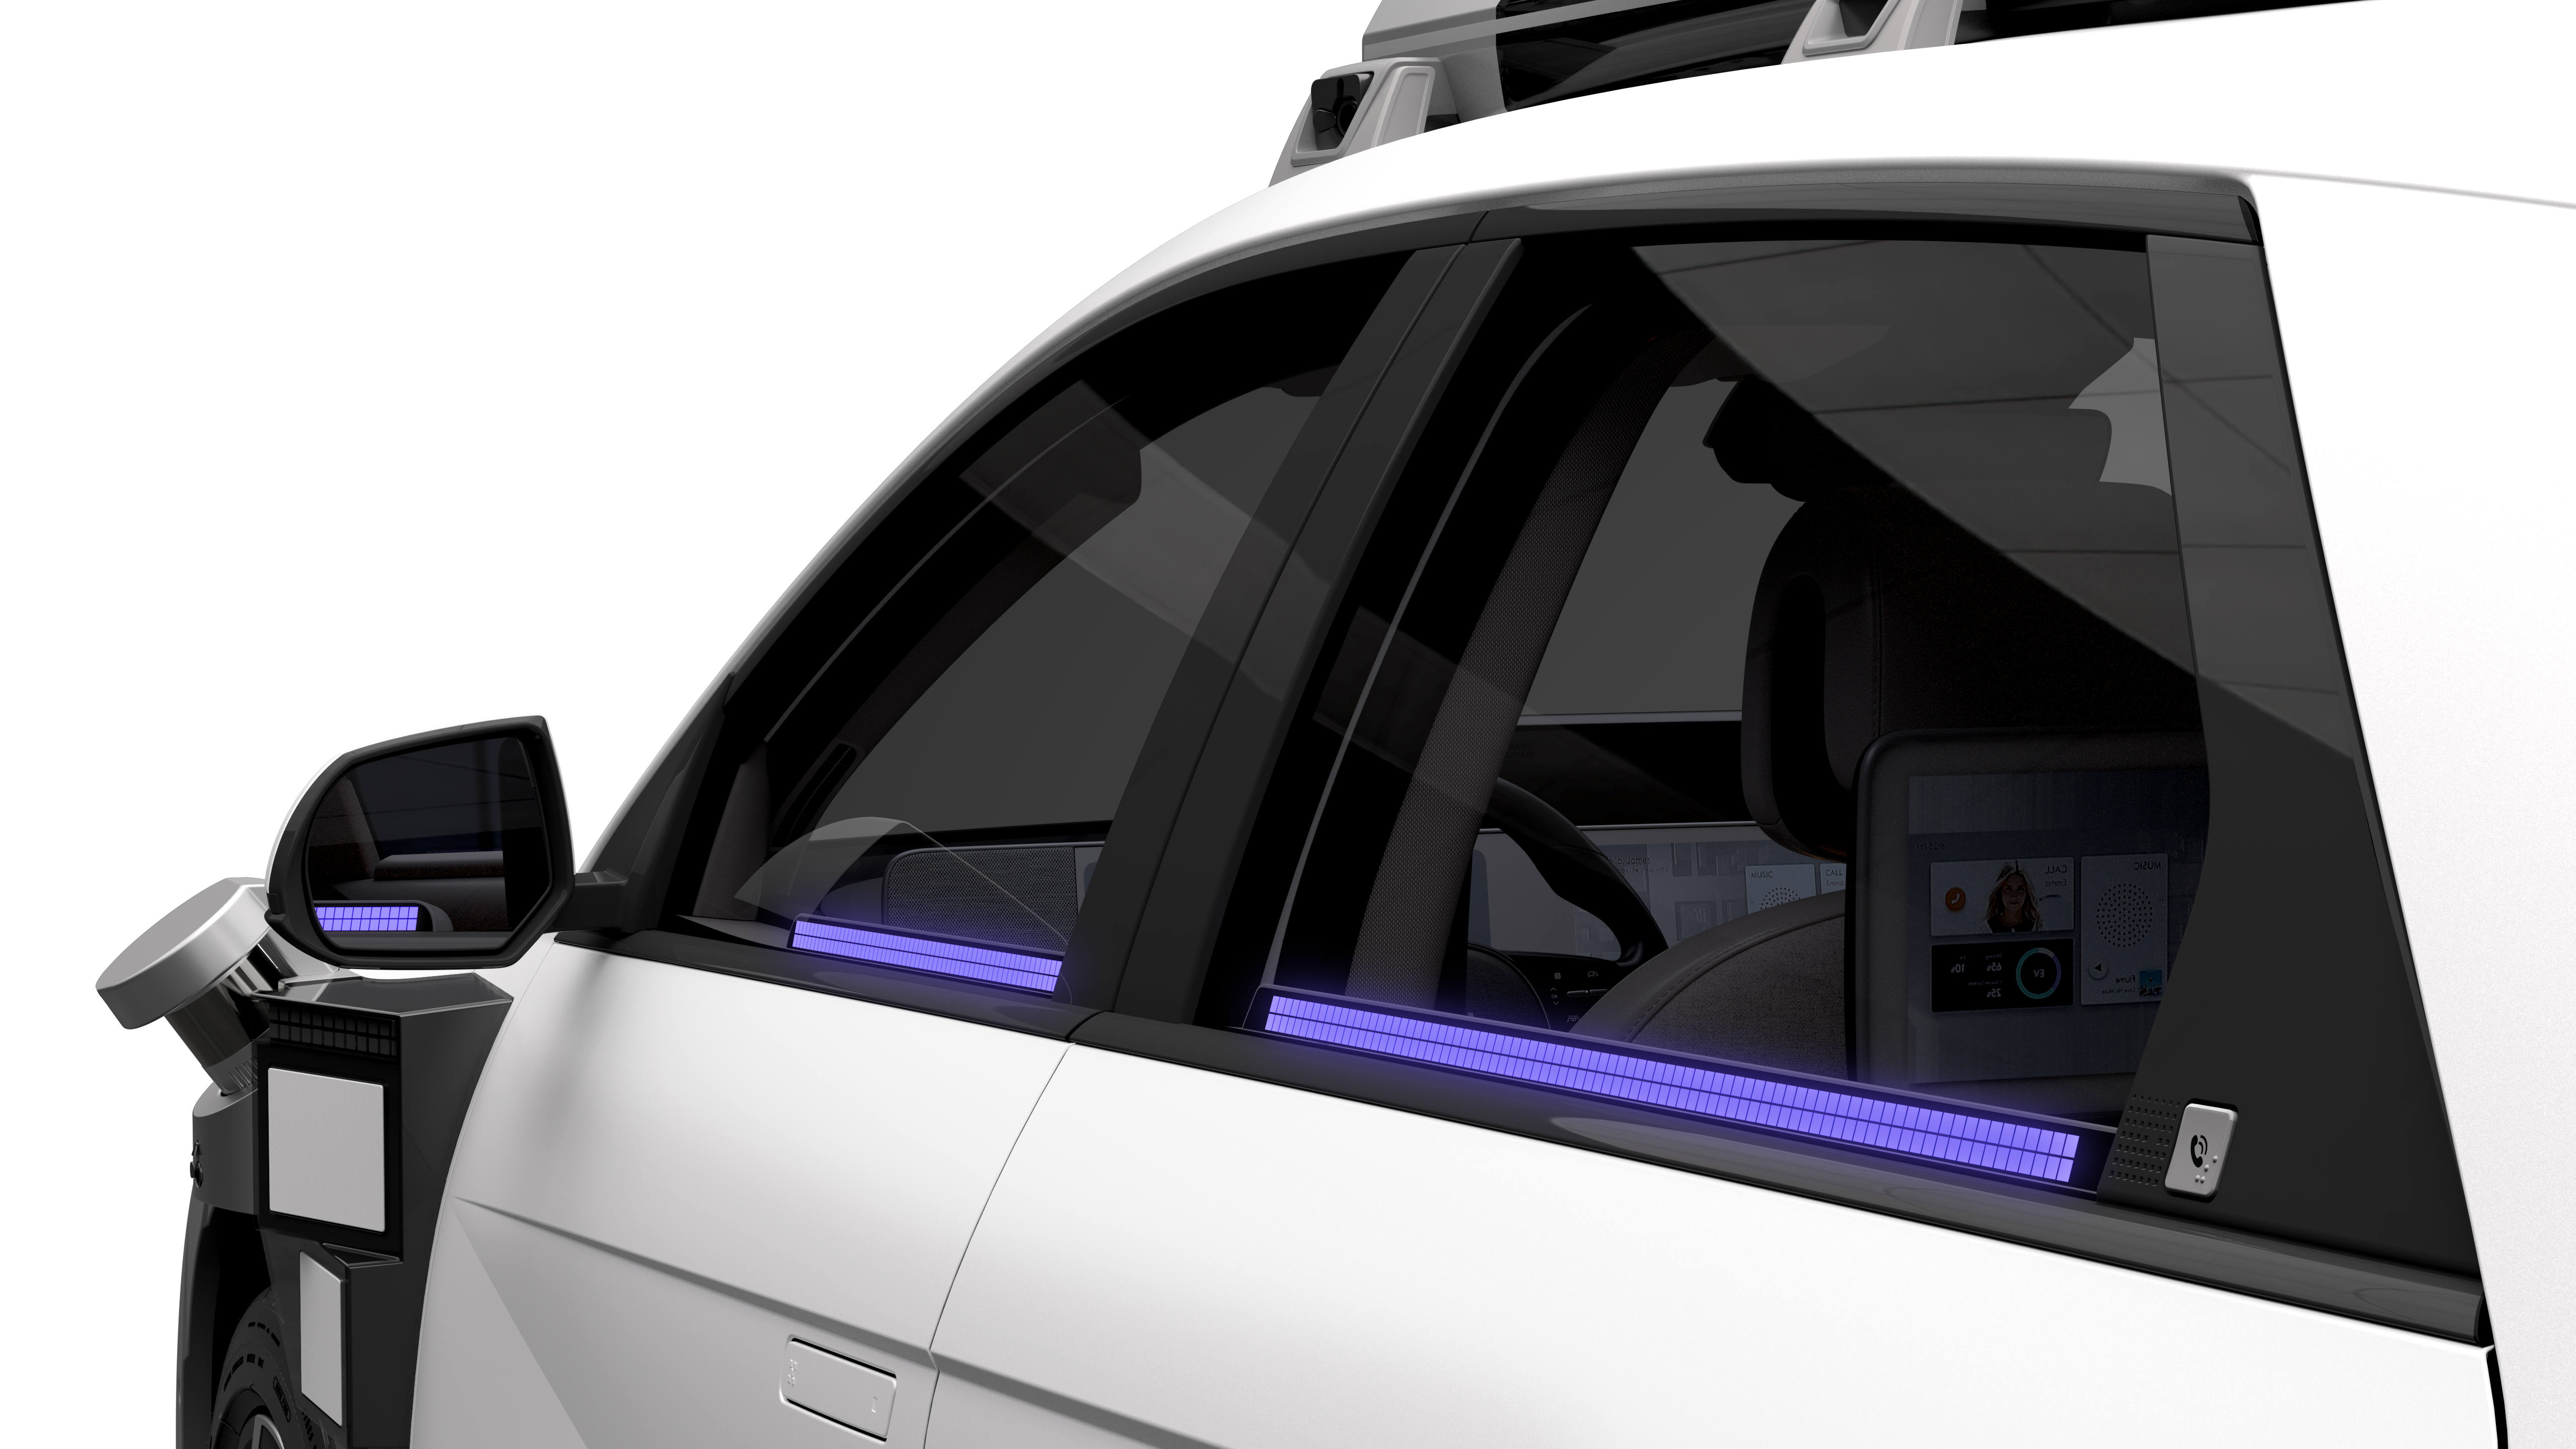 A side view of the IONIQ5 robotaxi showing an LED strip along the windows